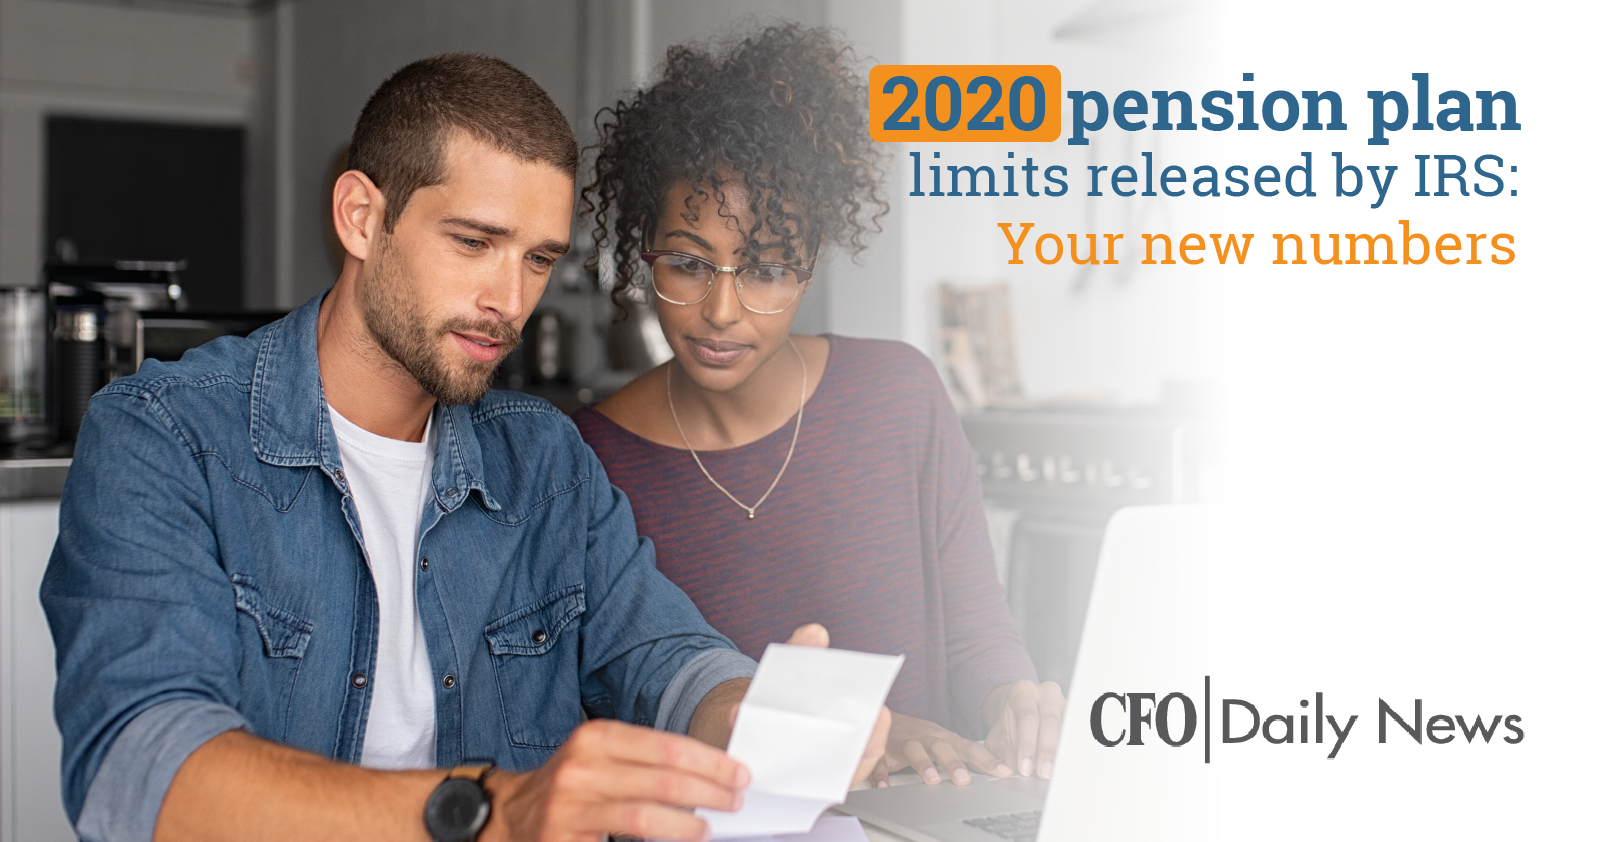 2020 pension plan limits released by IRS Your new numbers